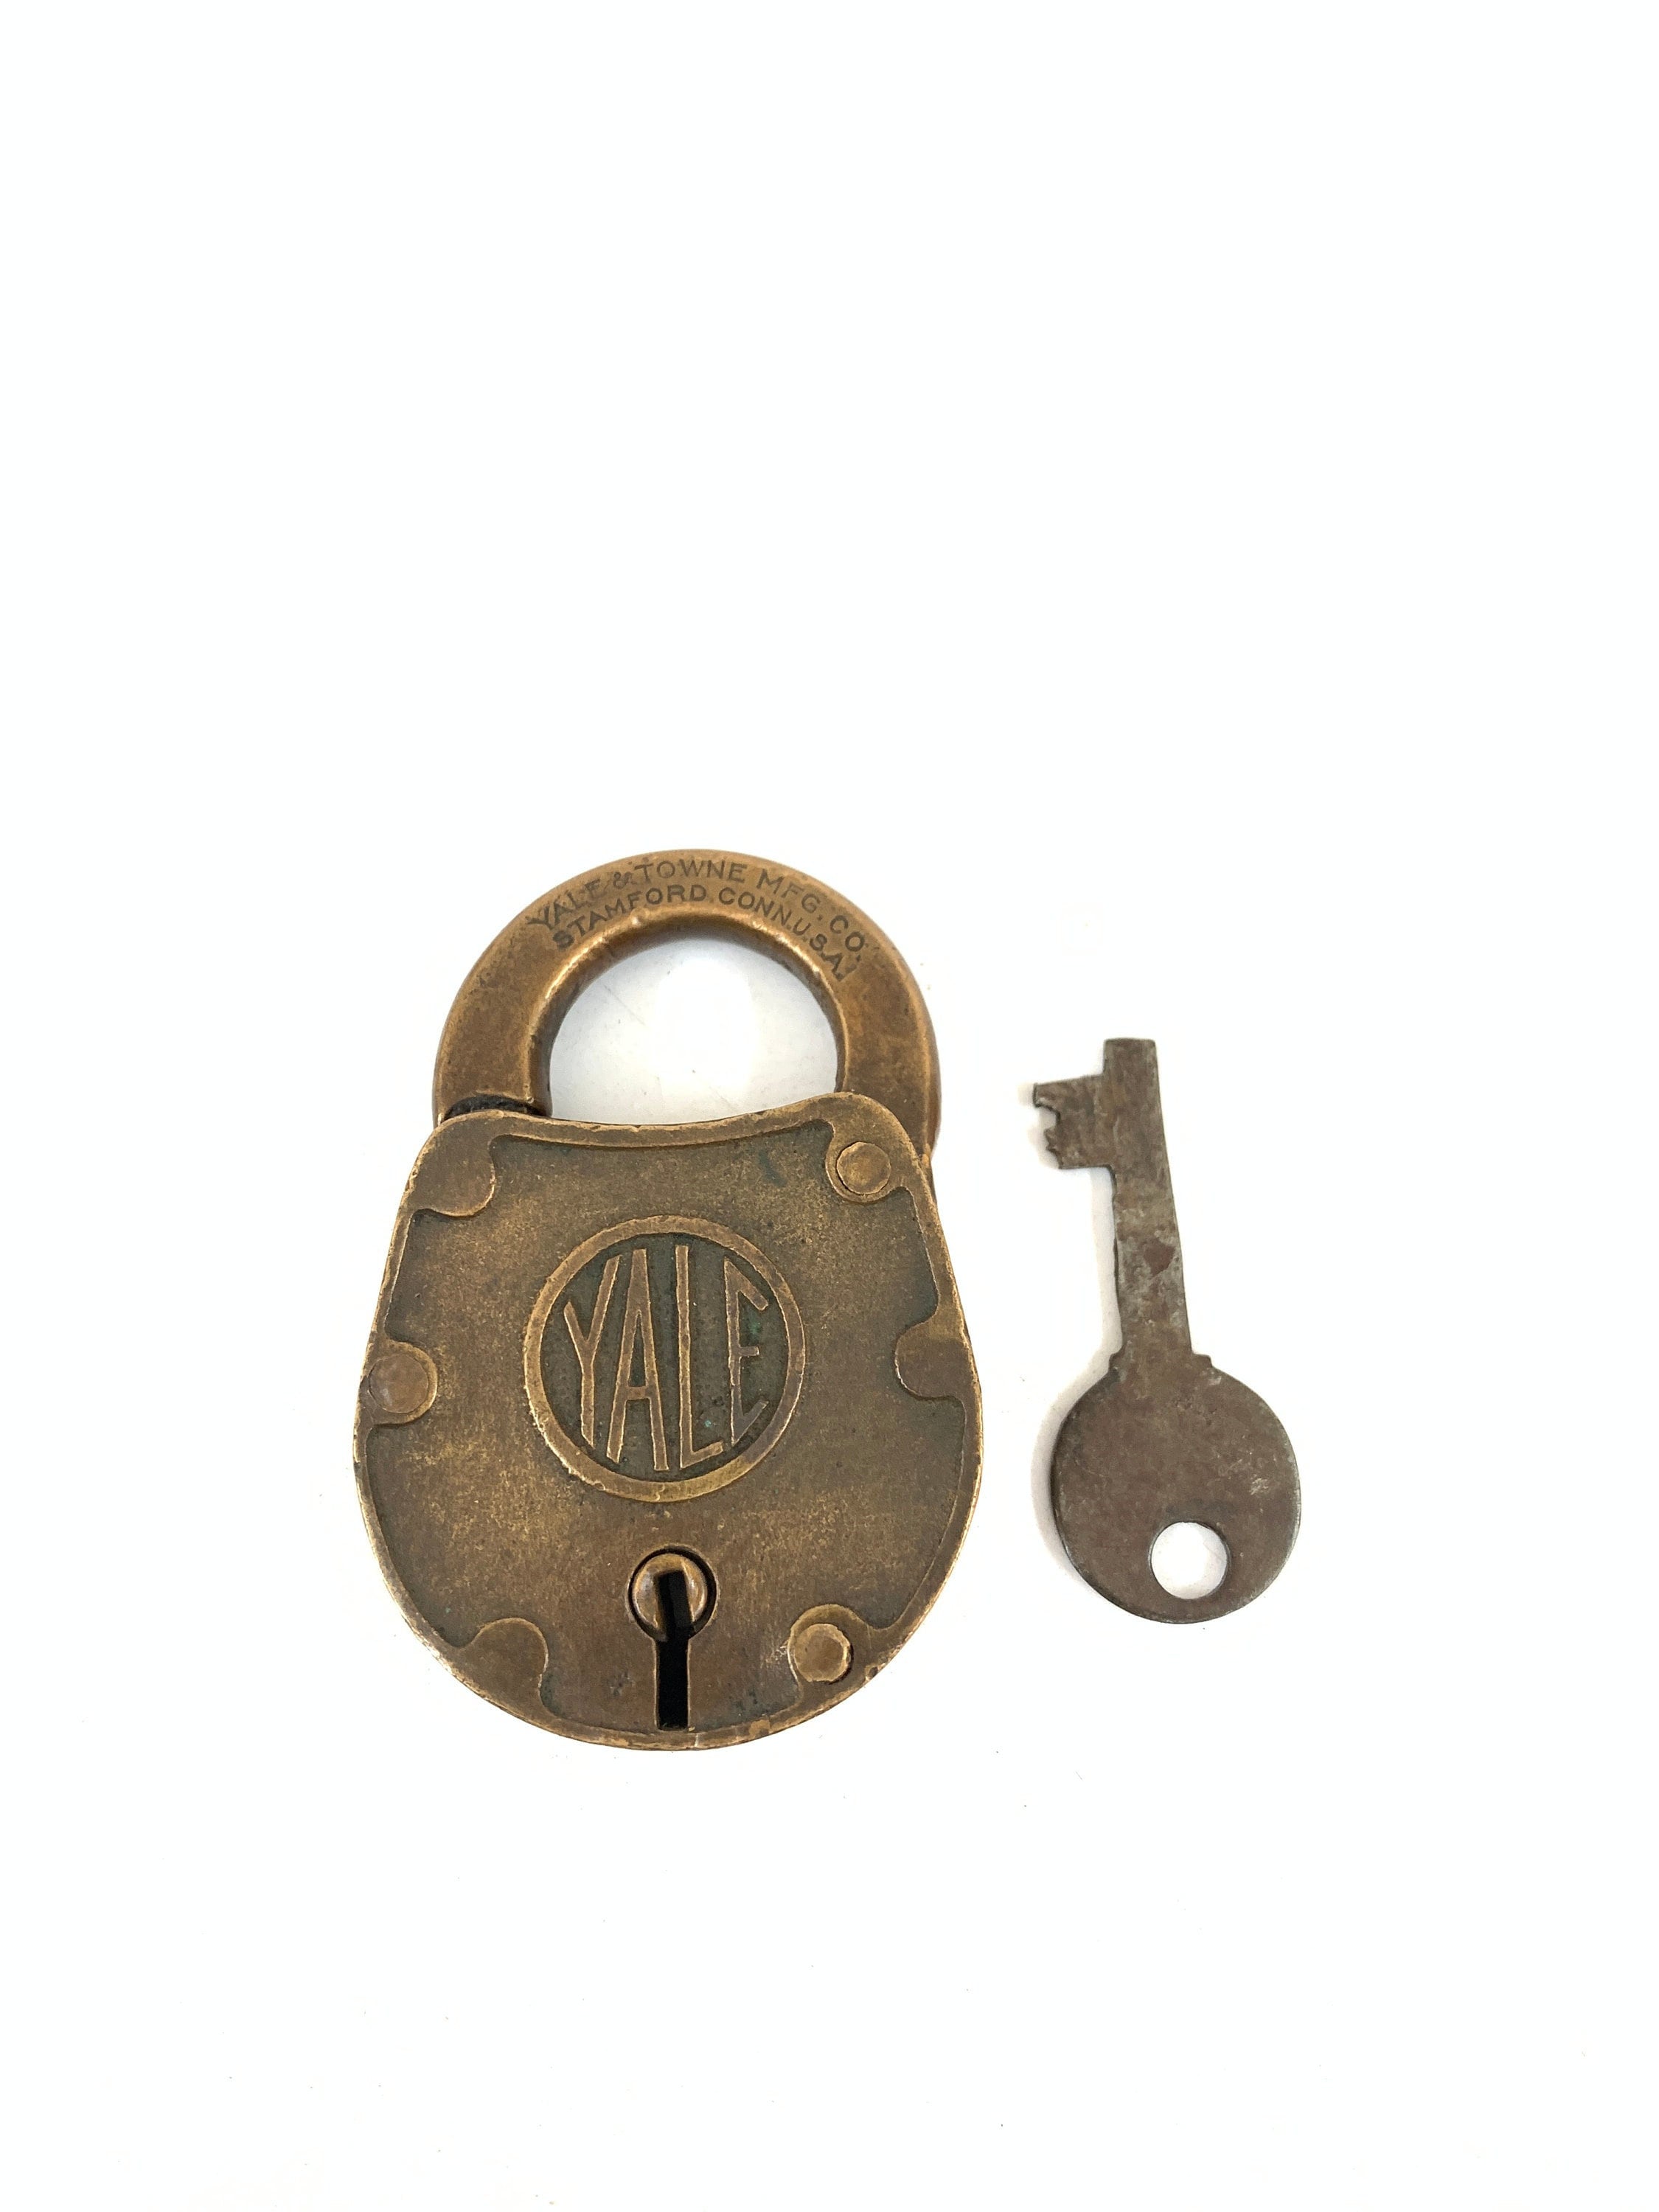 Antique Yale Lock And Two Key For Desk Drawer Stamford Yale & Towne USA MFG.